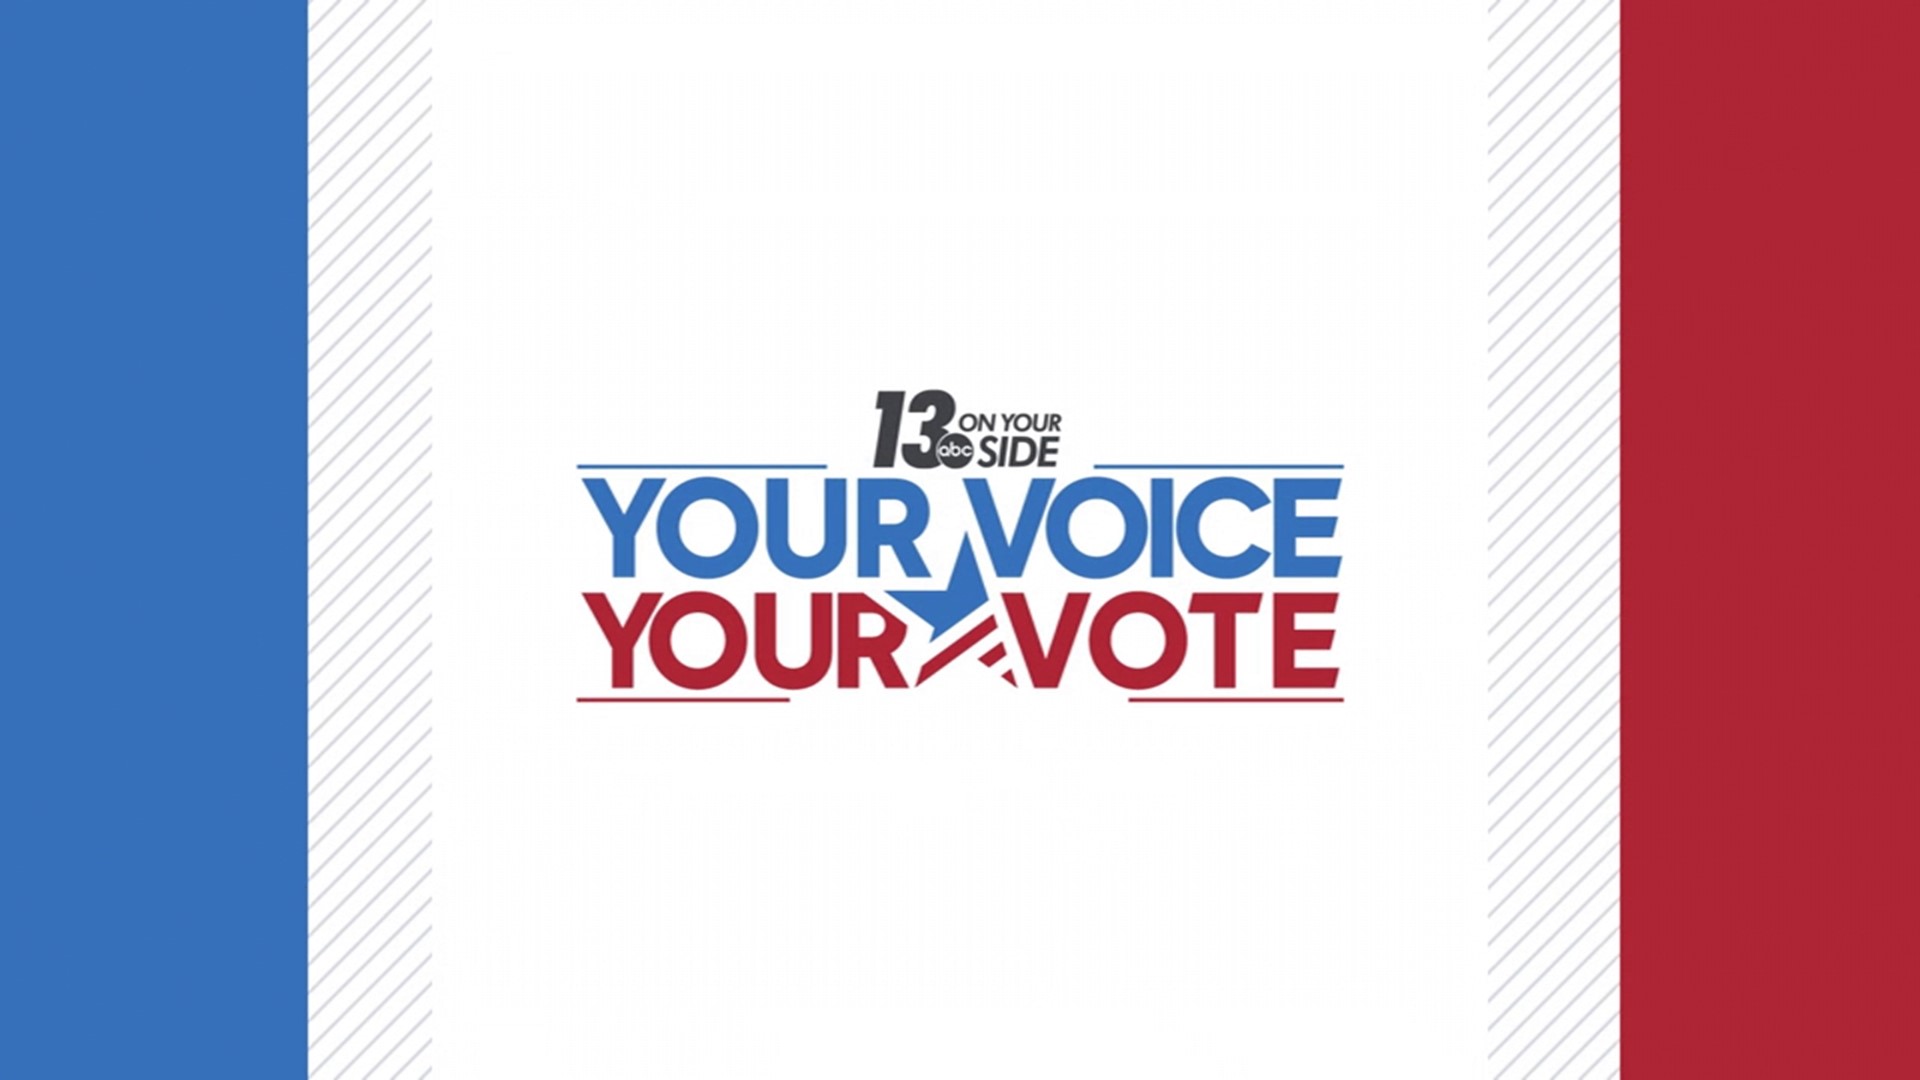 13 ON YOUR SIDE previews the GOP candidates for Governor and upcoming millages you will see on your ballots come August 2, 2022.